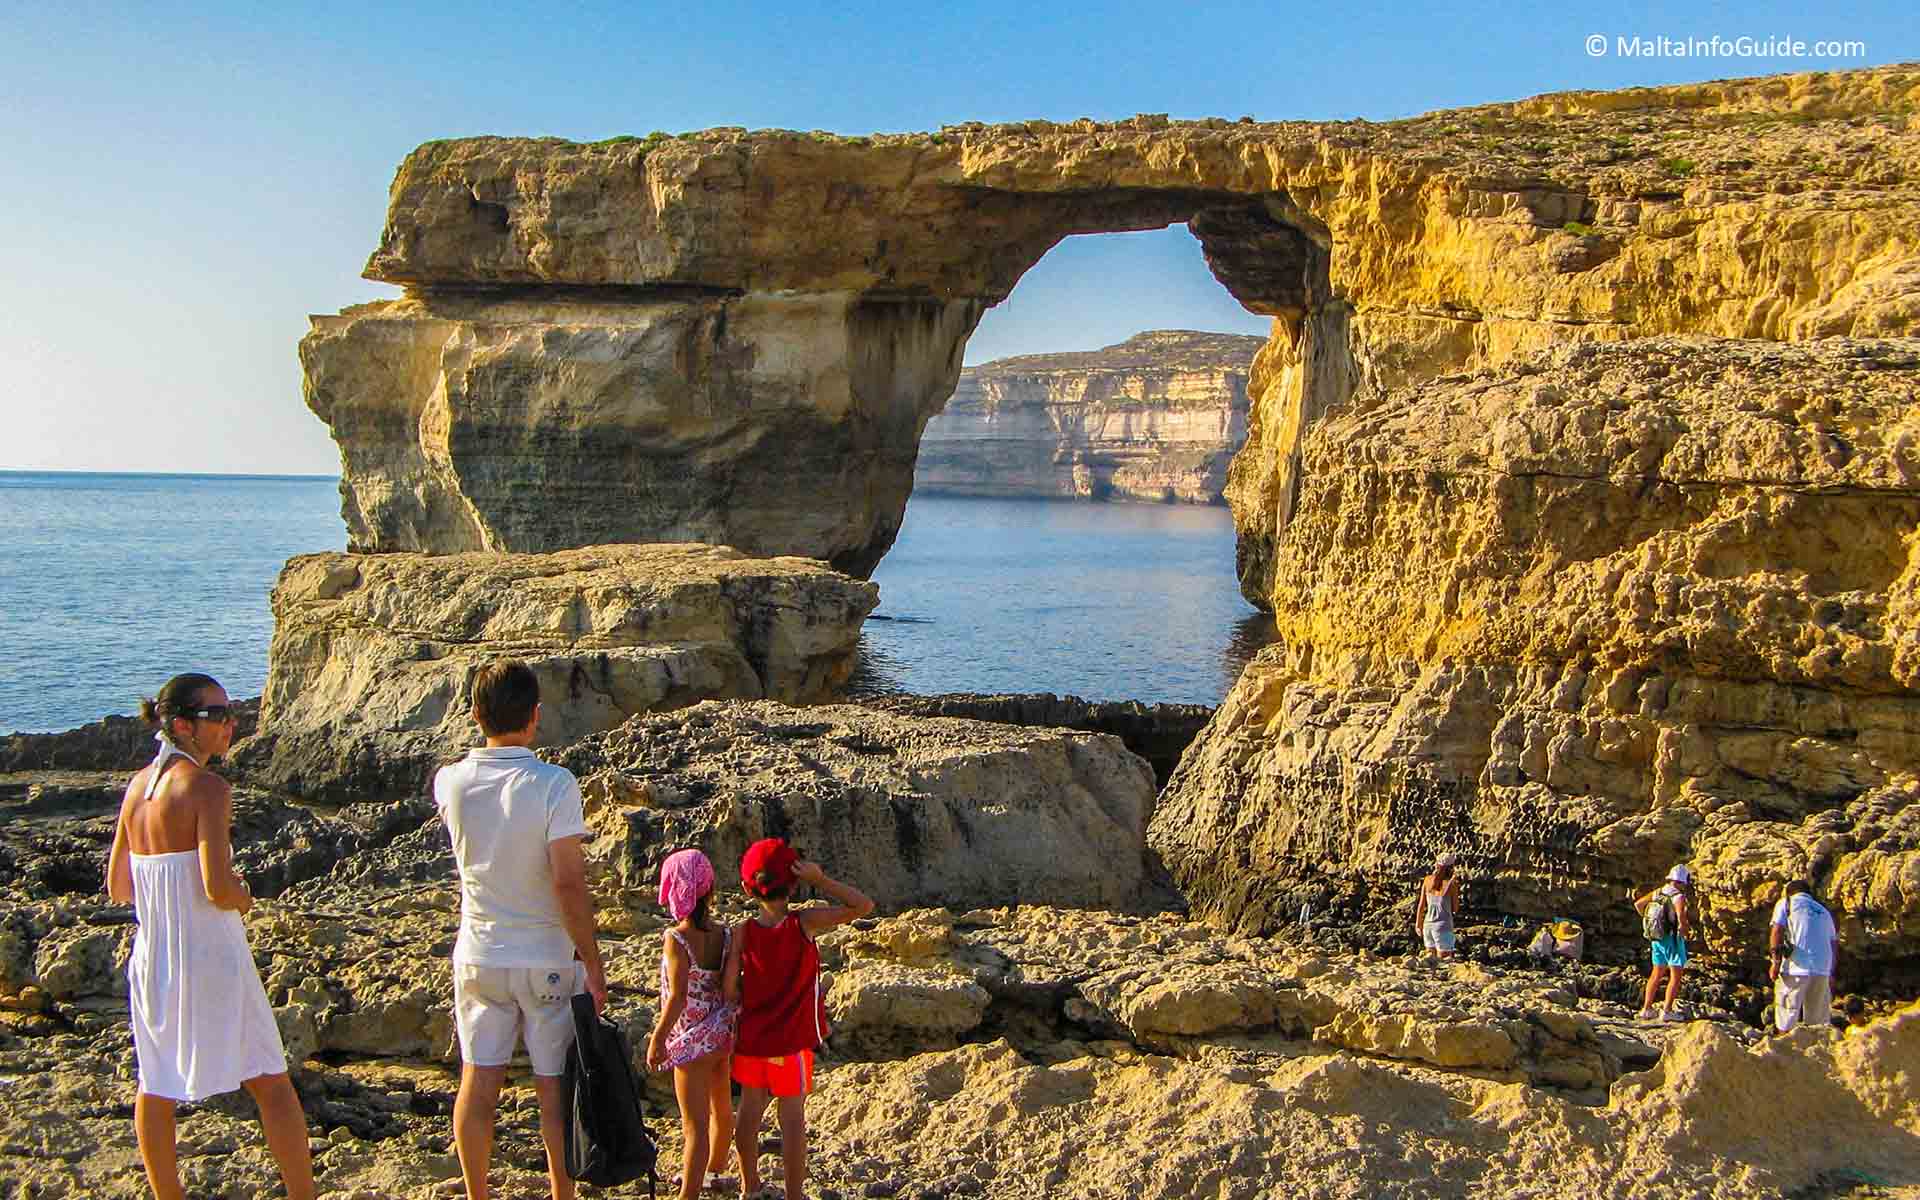 A family looking at the Azure Window 5 years before its collapse.